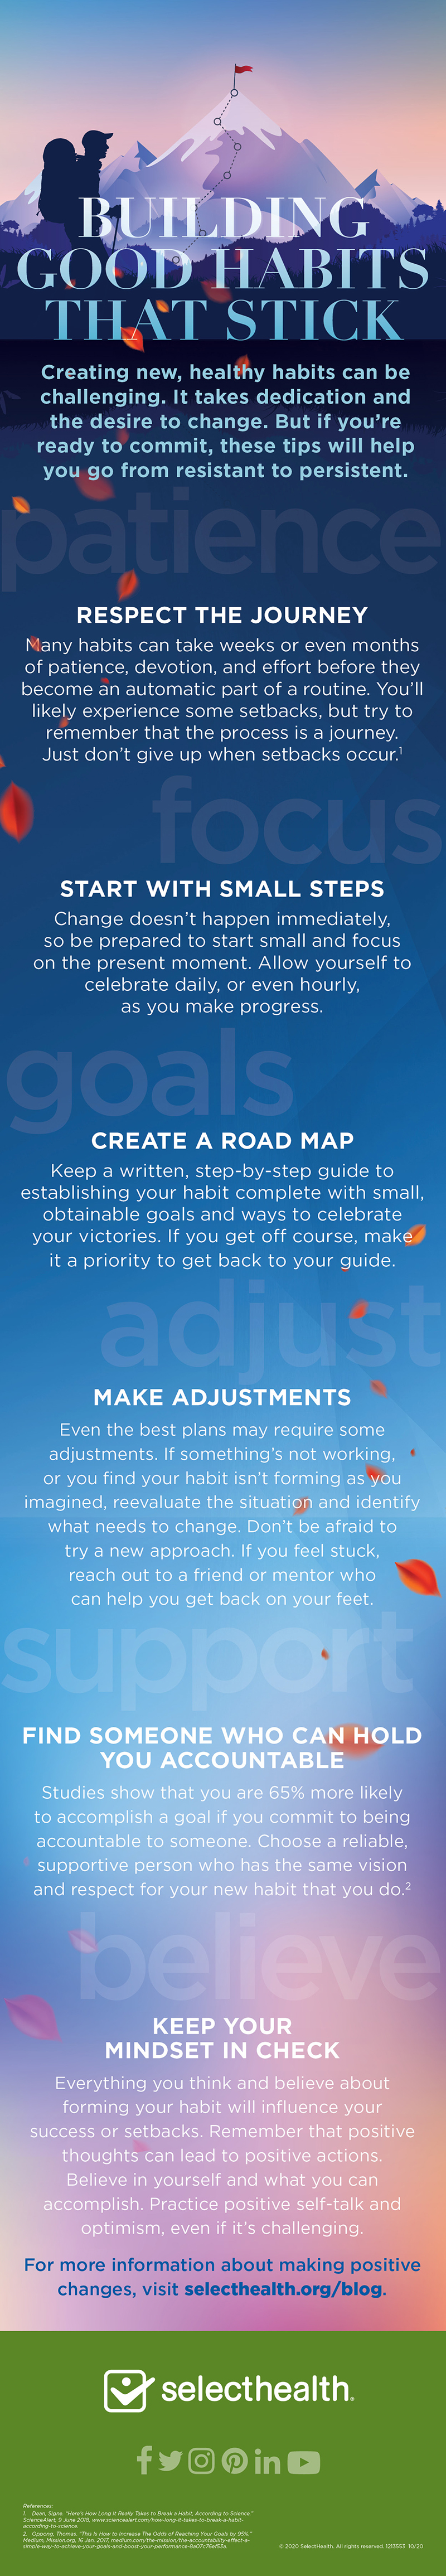 Infographic illustrating how build good habits that stick